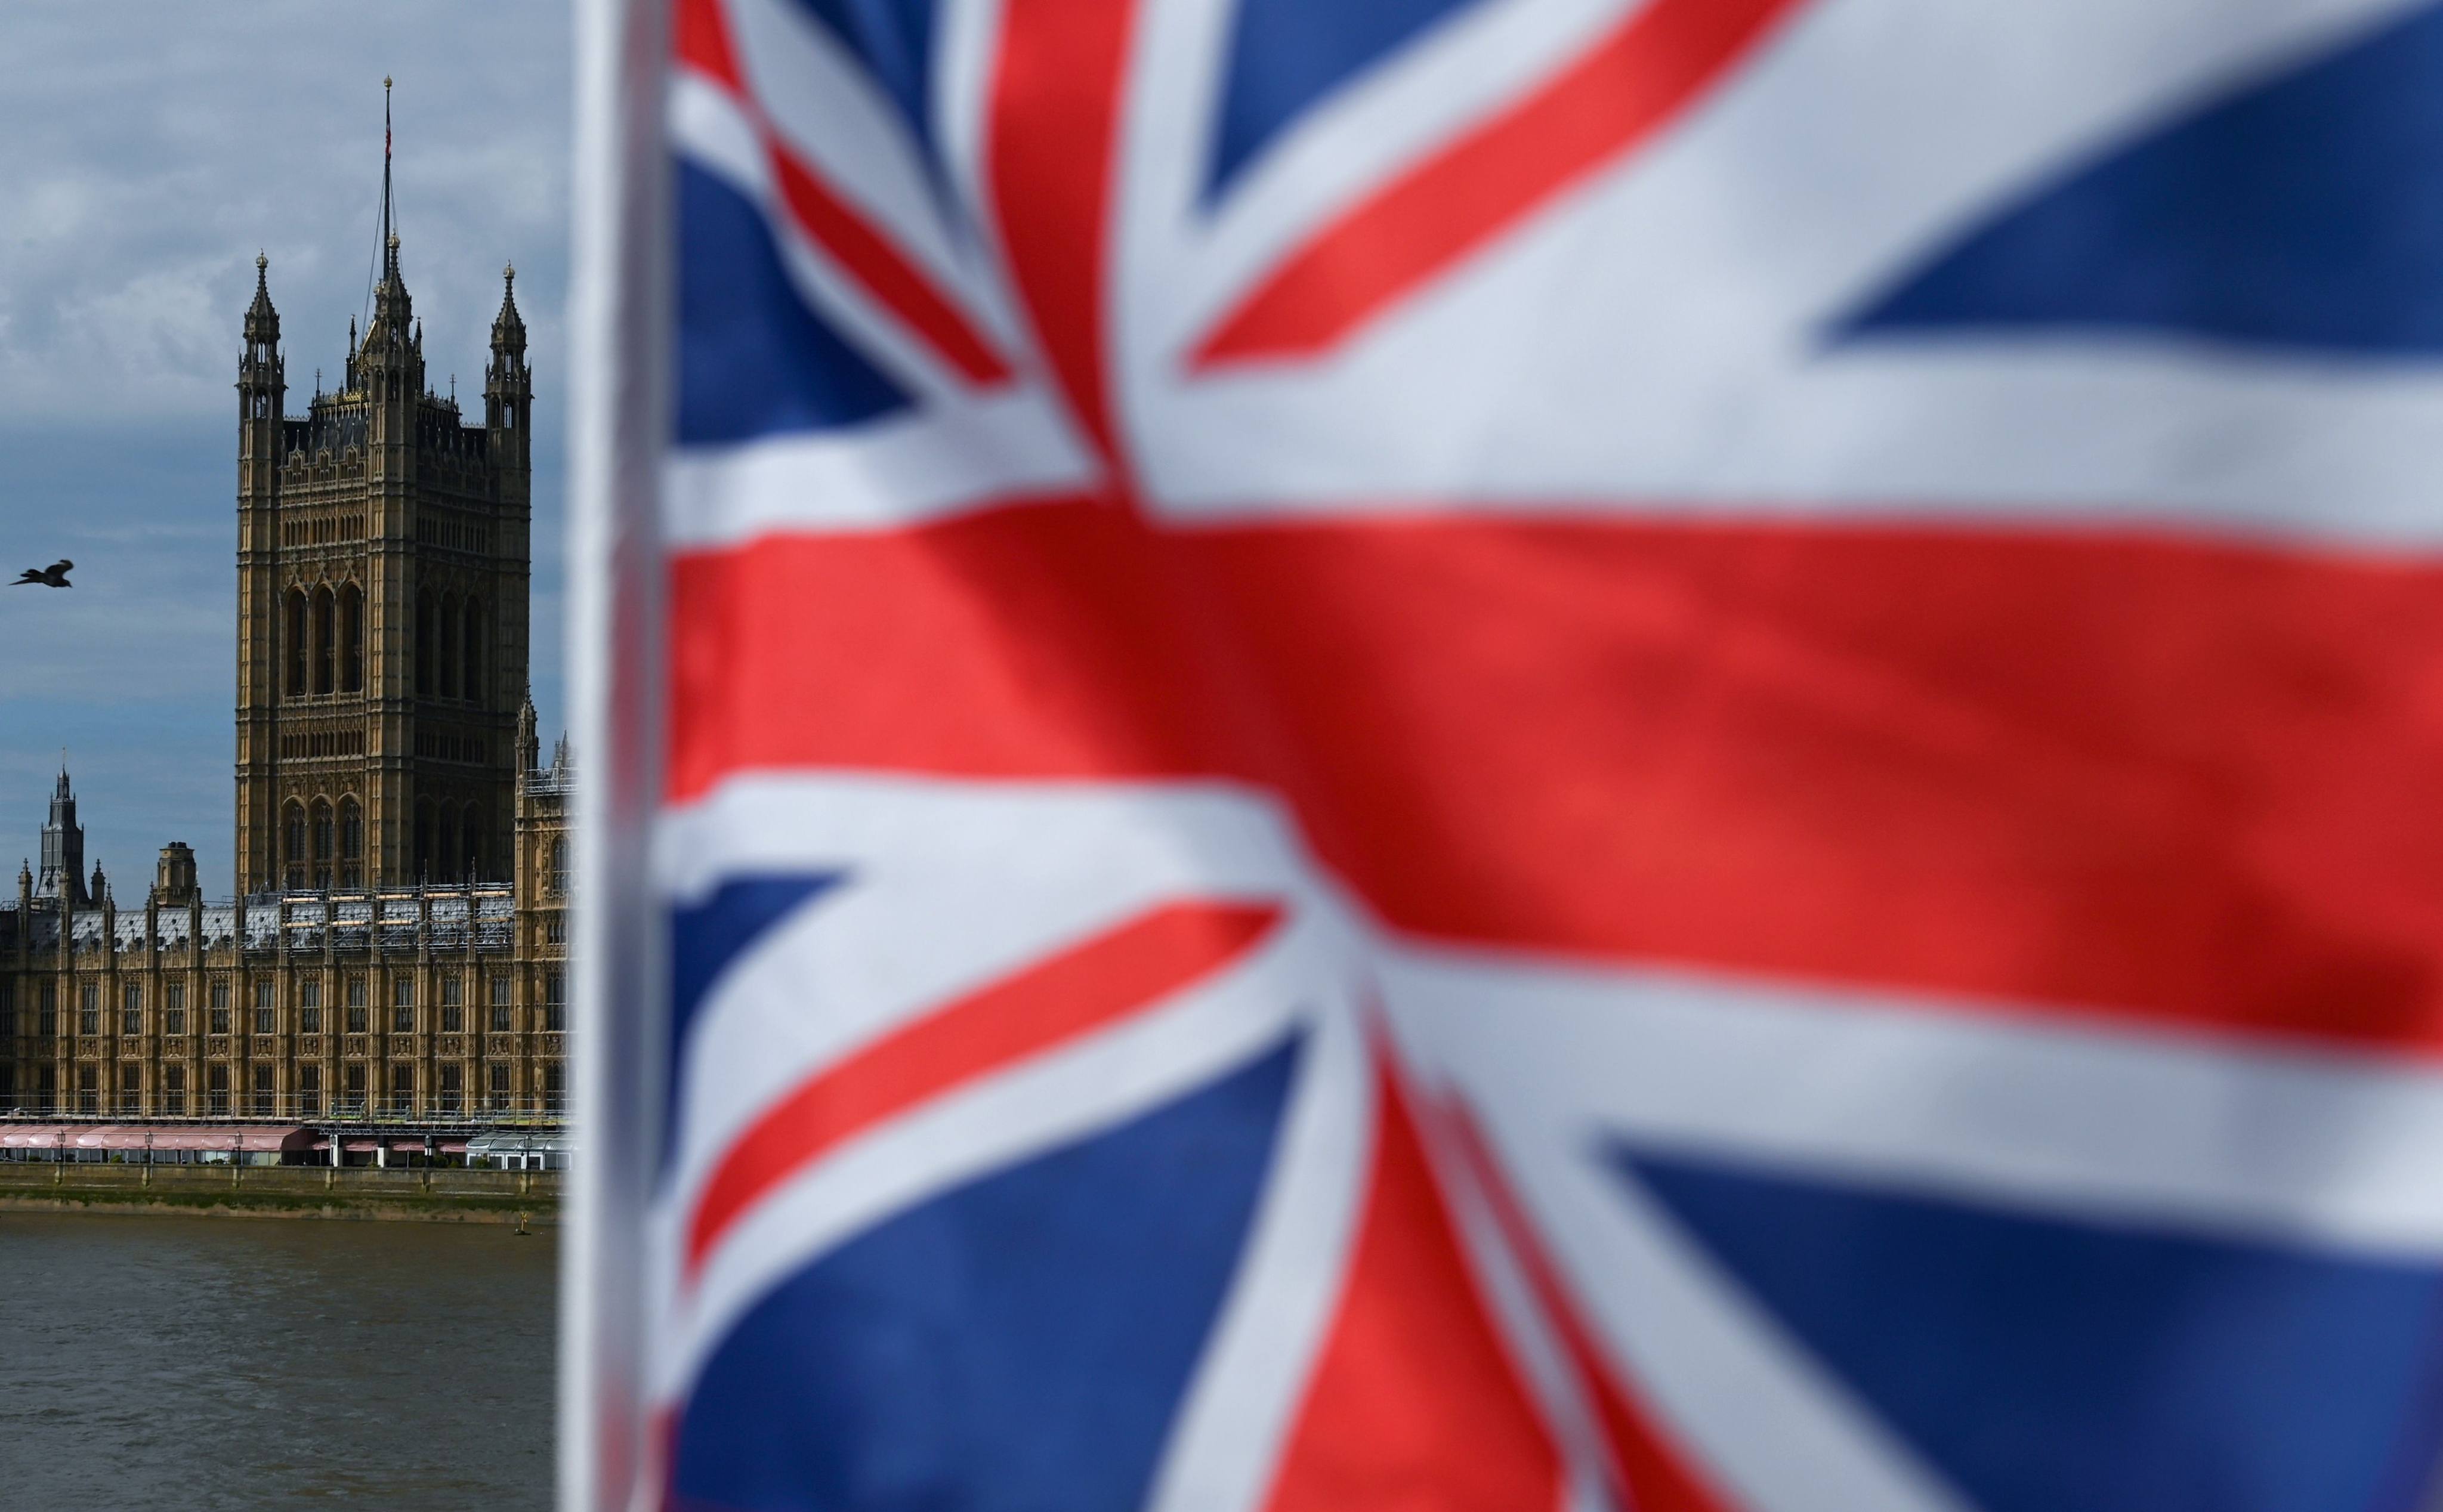 The Palace of Westminster, housing the British houses of Parliament, is seen from Westminster Bridge with a Union flag in the foreground, in central London on August 28, 2019. Photo: AFP